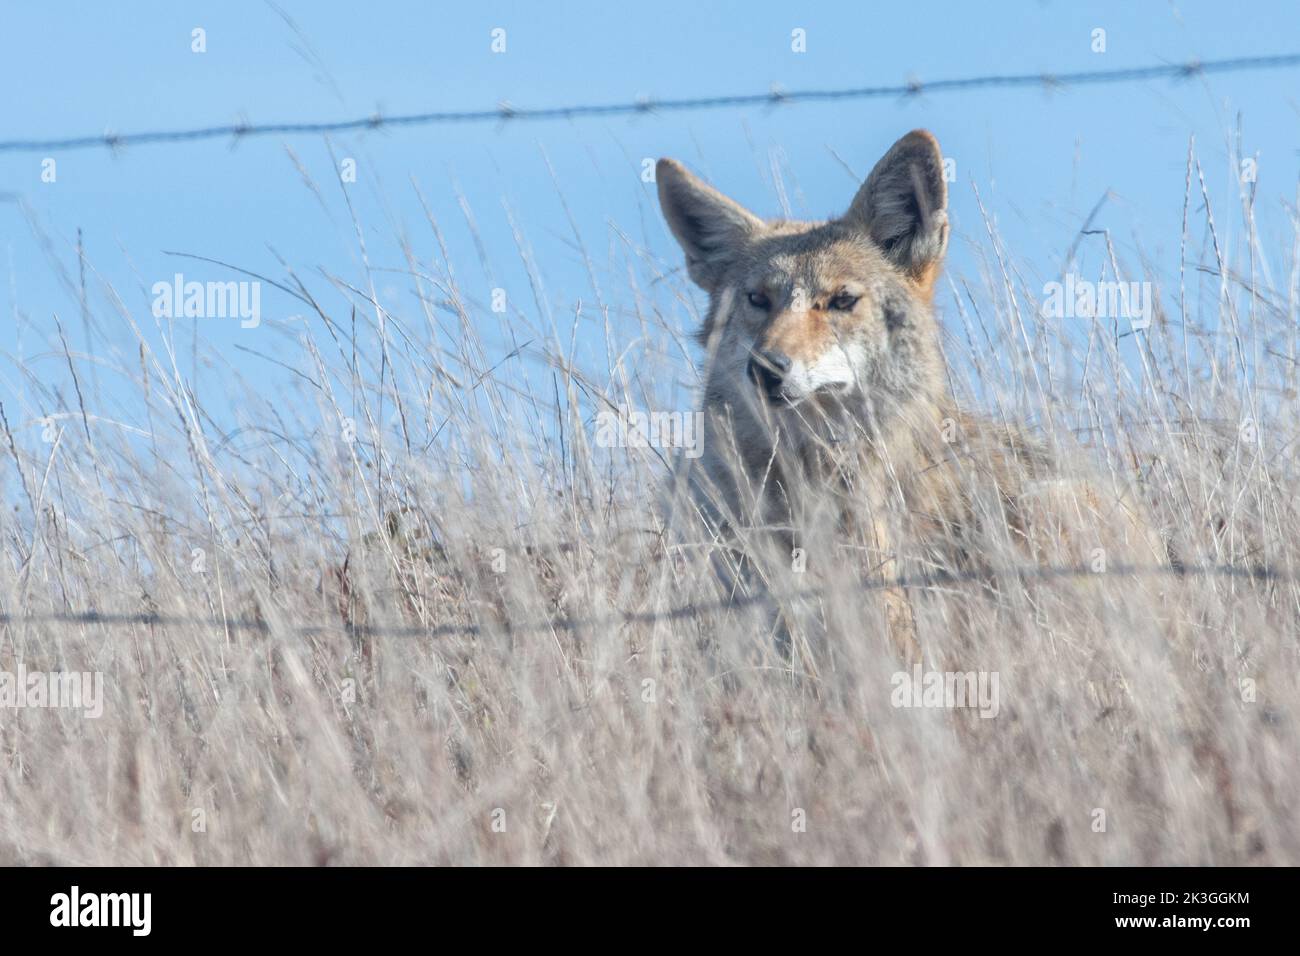 A coyote (Canis latrans) behind a barbed wire fence looking through it in California, USA. Stock Photo